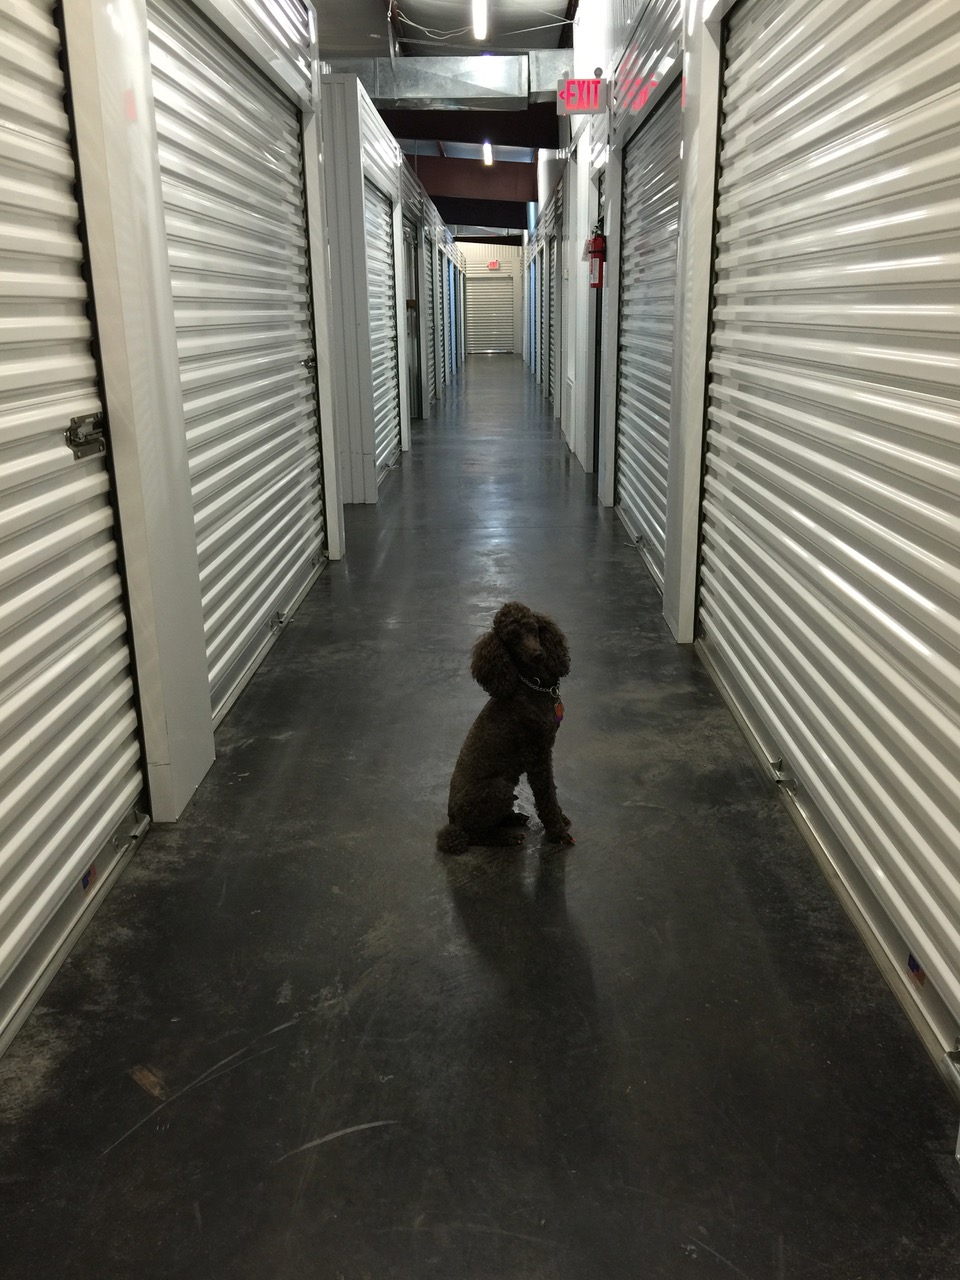 Hallway of interior storage units with a dog posing in the foreground